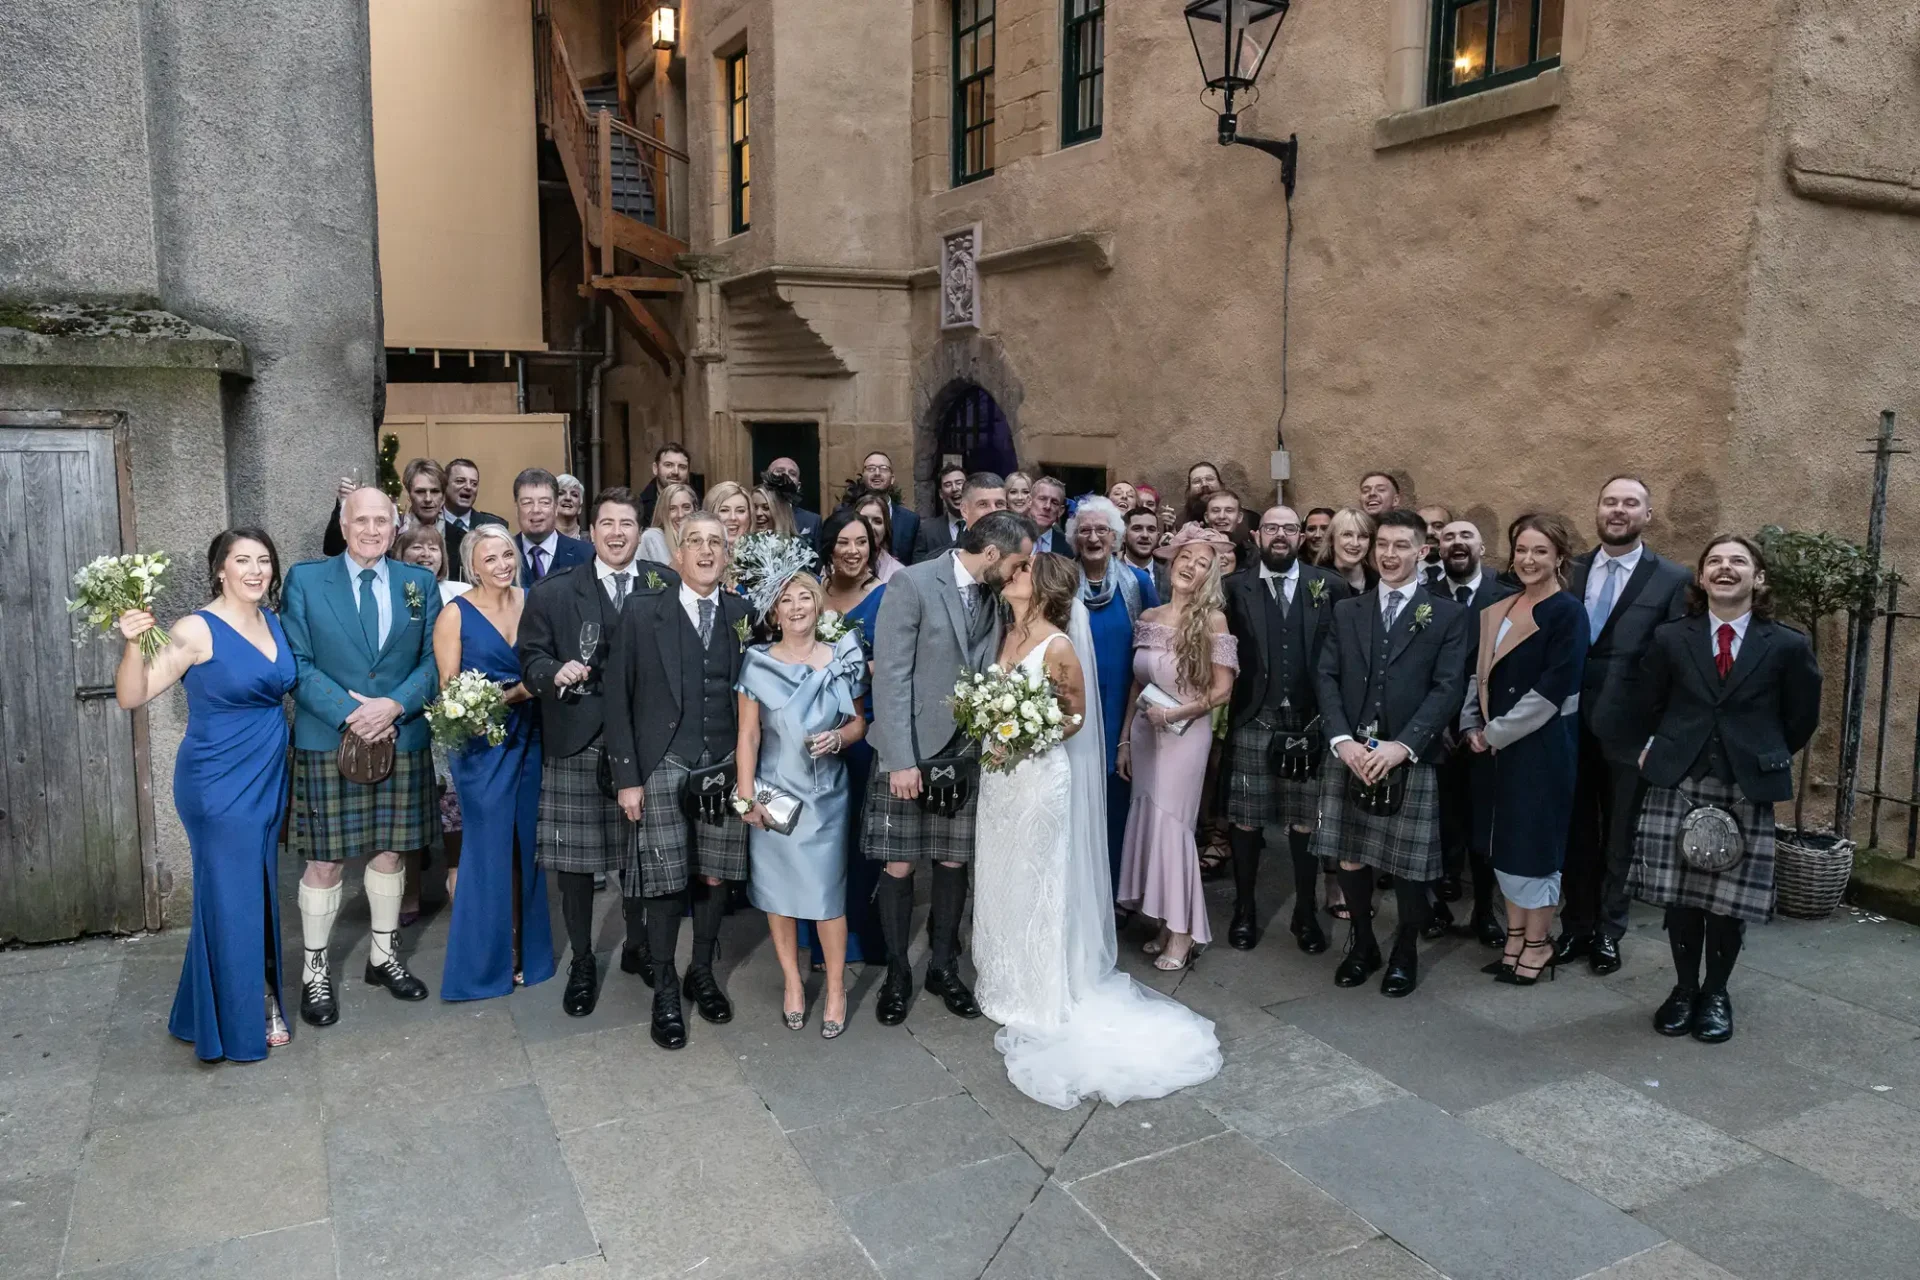 A large wedding group photo featuring a bride and groom kissing, surrounded by guests in formal attire, many in scottish kilts, in a historic courtyard.